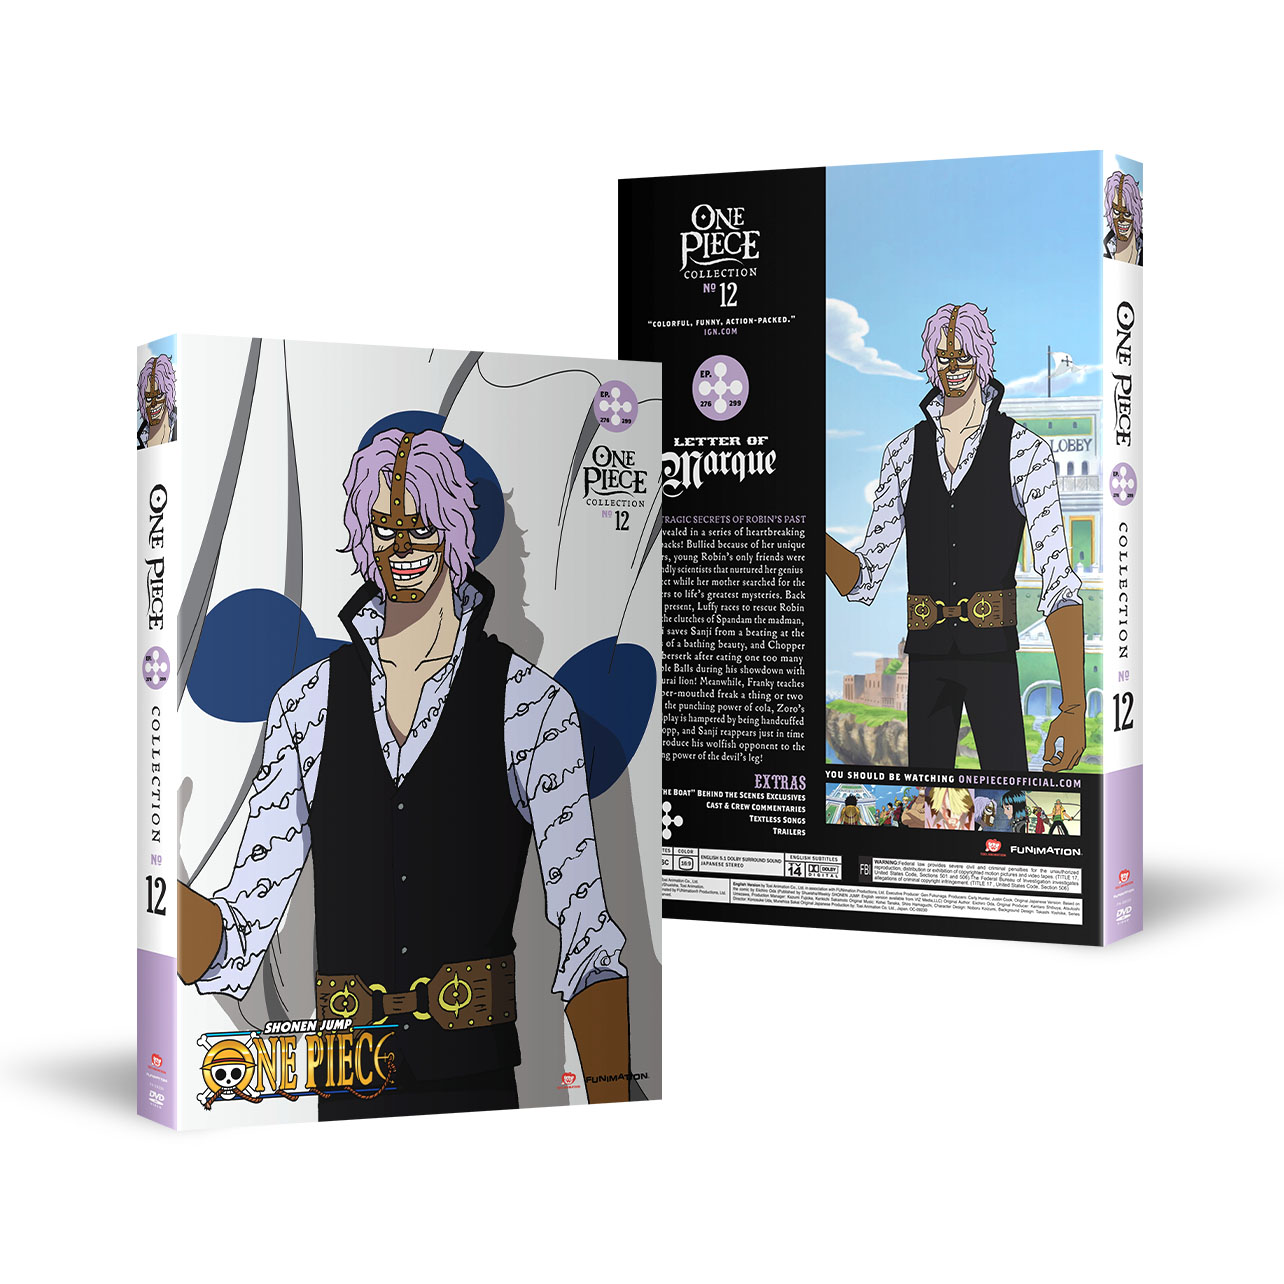 One Piece - Collection 12 - DVD image count 0